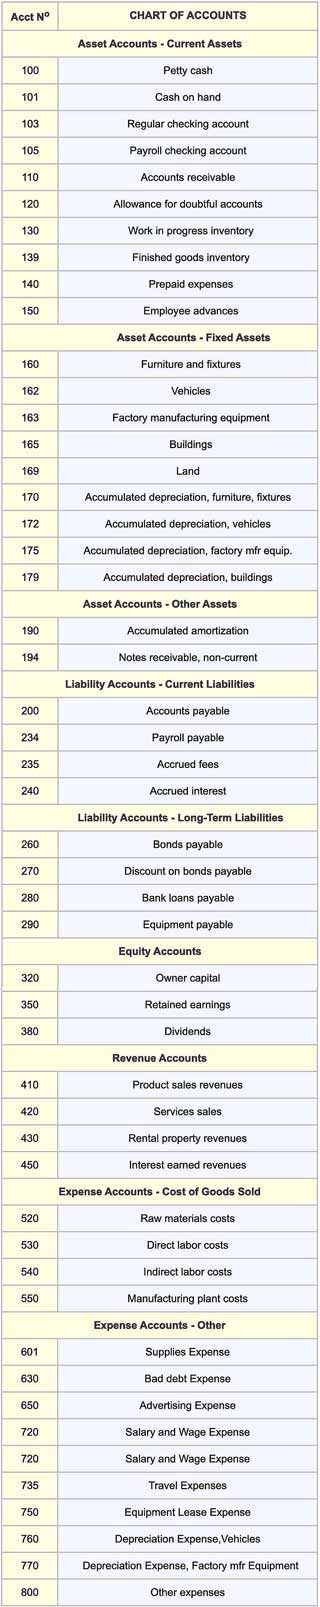 Debits and credits have different impacts in different account categories.